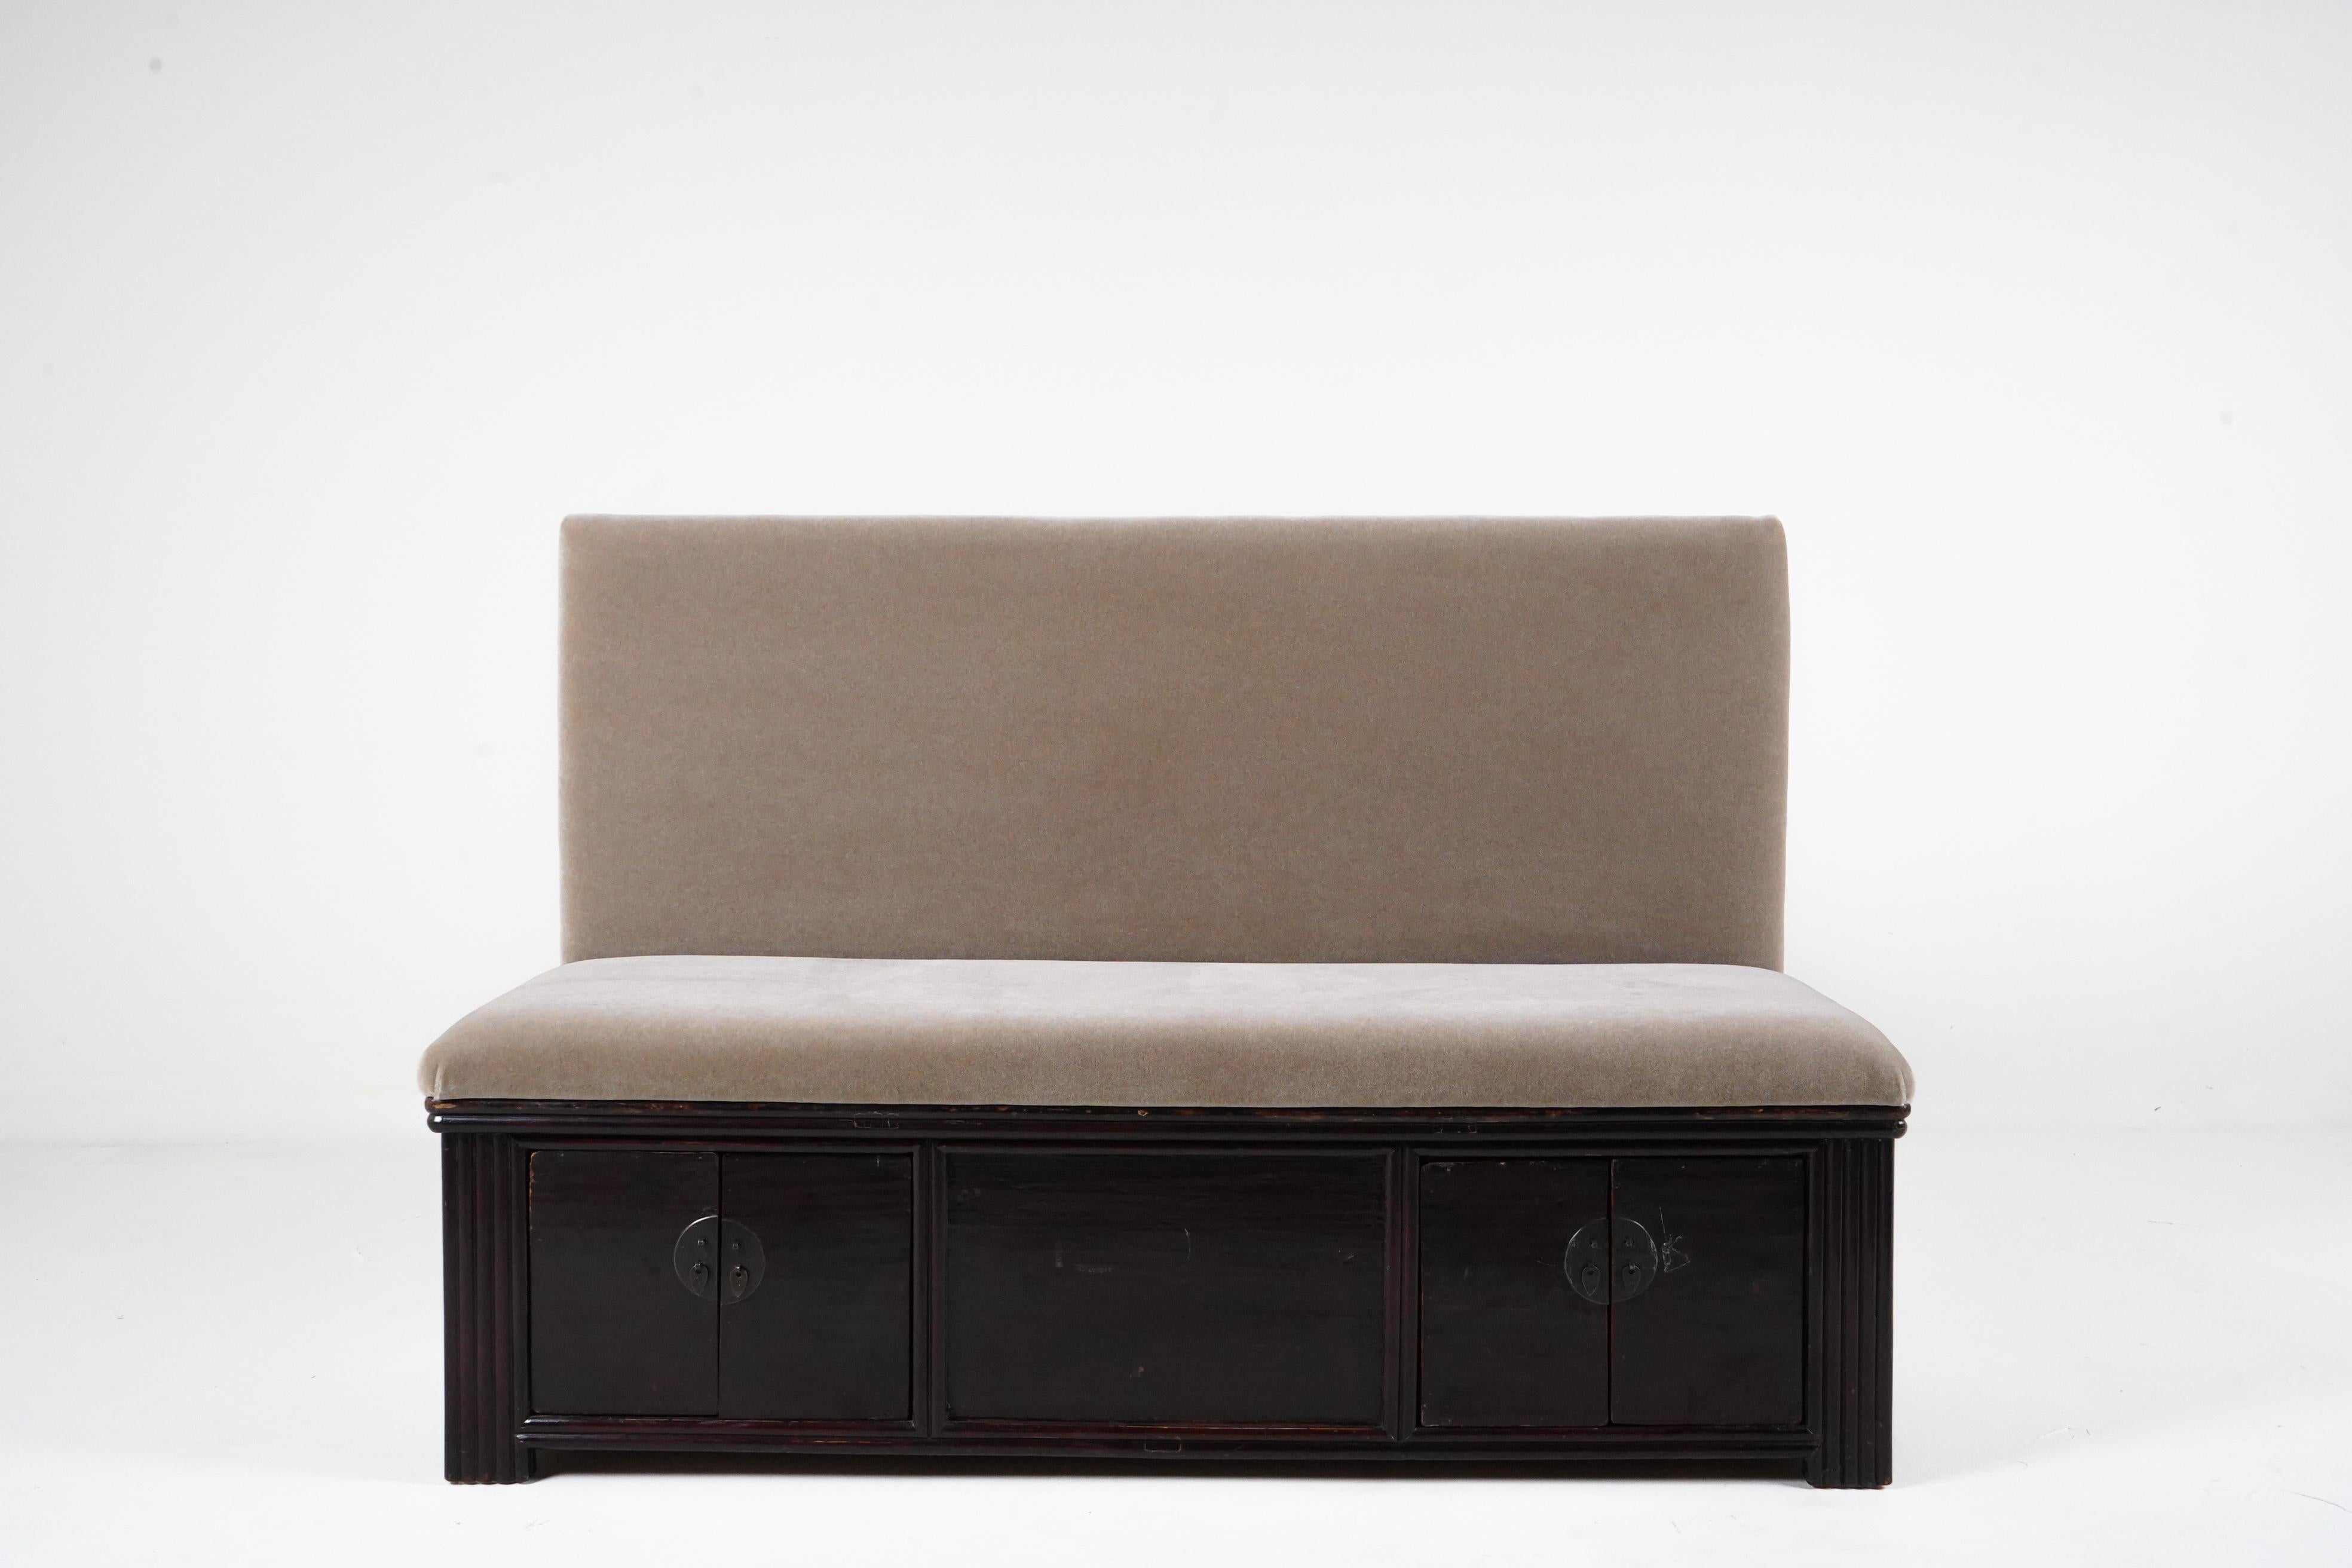 This unique upholstered bench is built on an antique Chinese Kwang chest. The chest dates to the 19th century and is made from elm wood covered in dark oxblood lacquer with a French polish surface. The seat and seatback is covered in mohair. At only